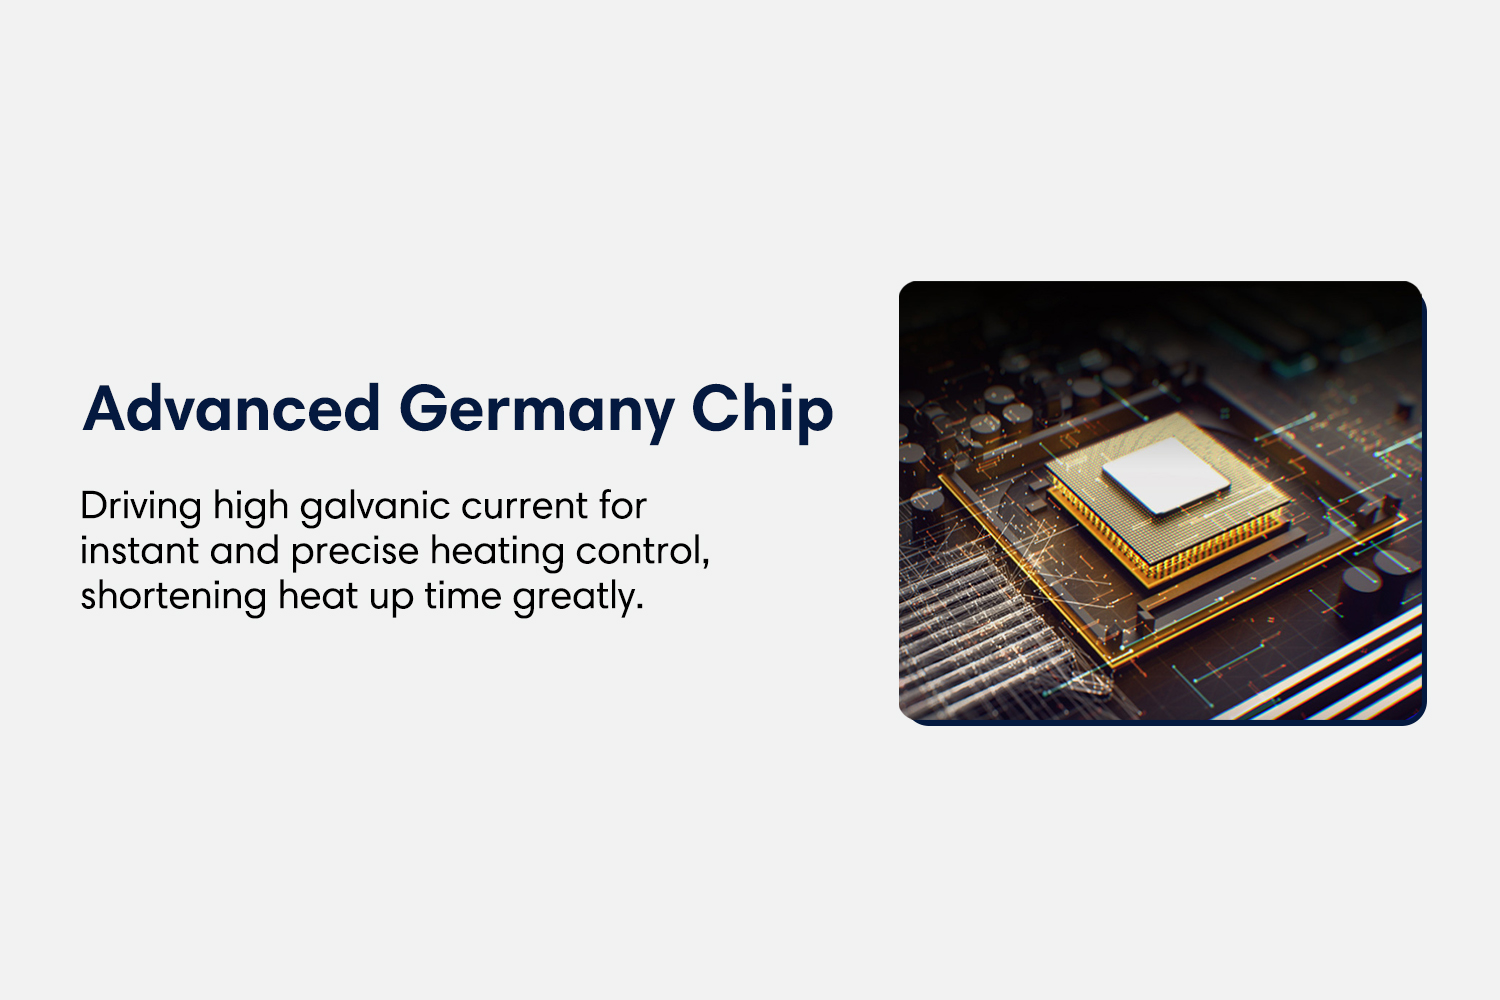 Advanced Germany chip Driving high galvanic current for instant and precise heating control, shortening heat up time greatly.